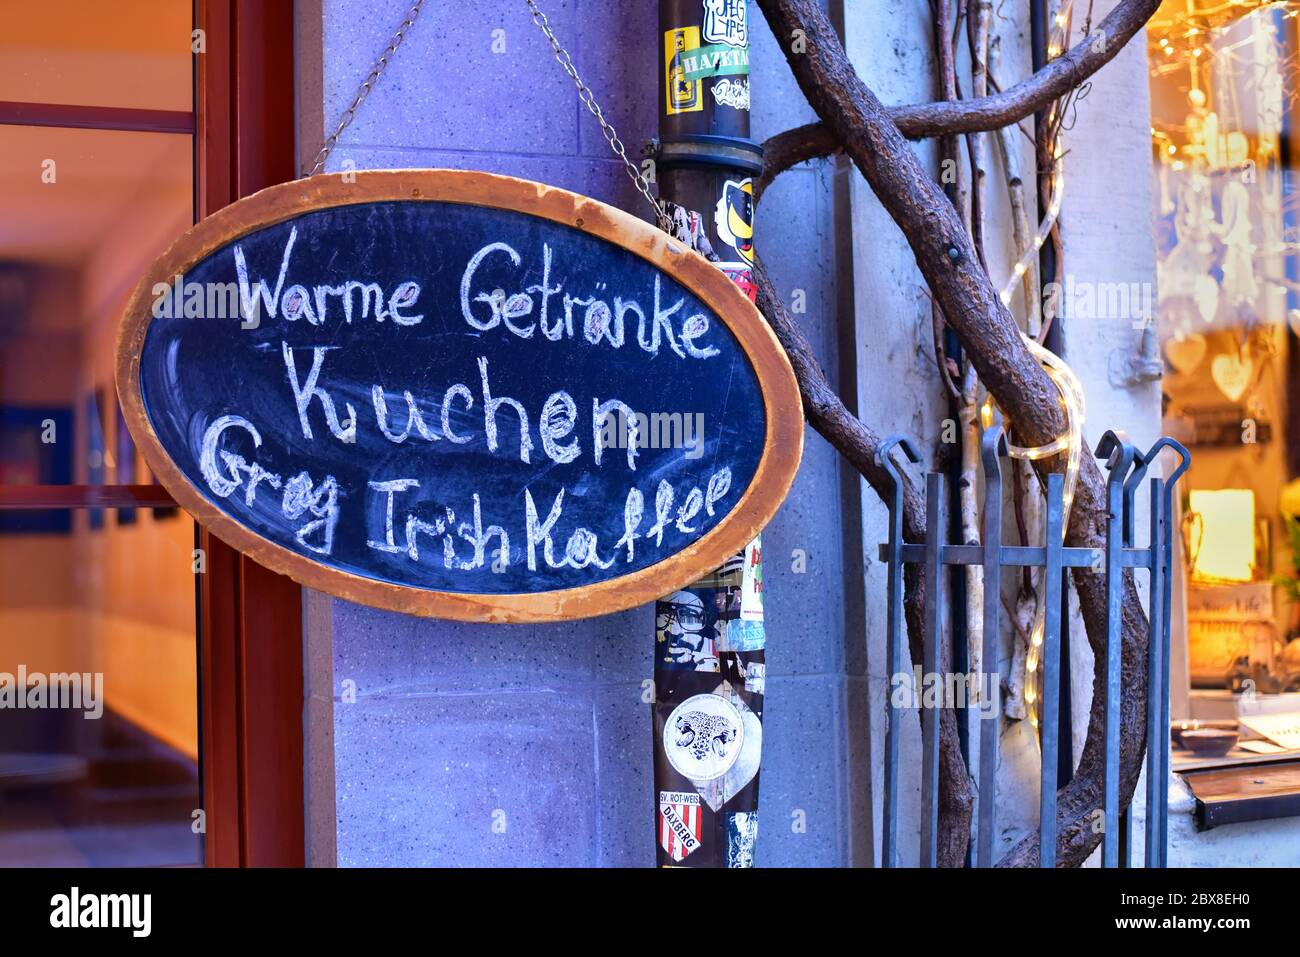 Chalkboard in front of a restaurant in Düsseldorf Old Town, saying 'Warme Getränke' (hot beverages), 'Kuchen' (cake), 'Grog' and 'Irish Coffee'. Stock Photo